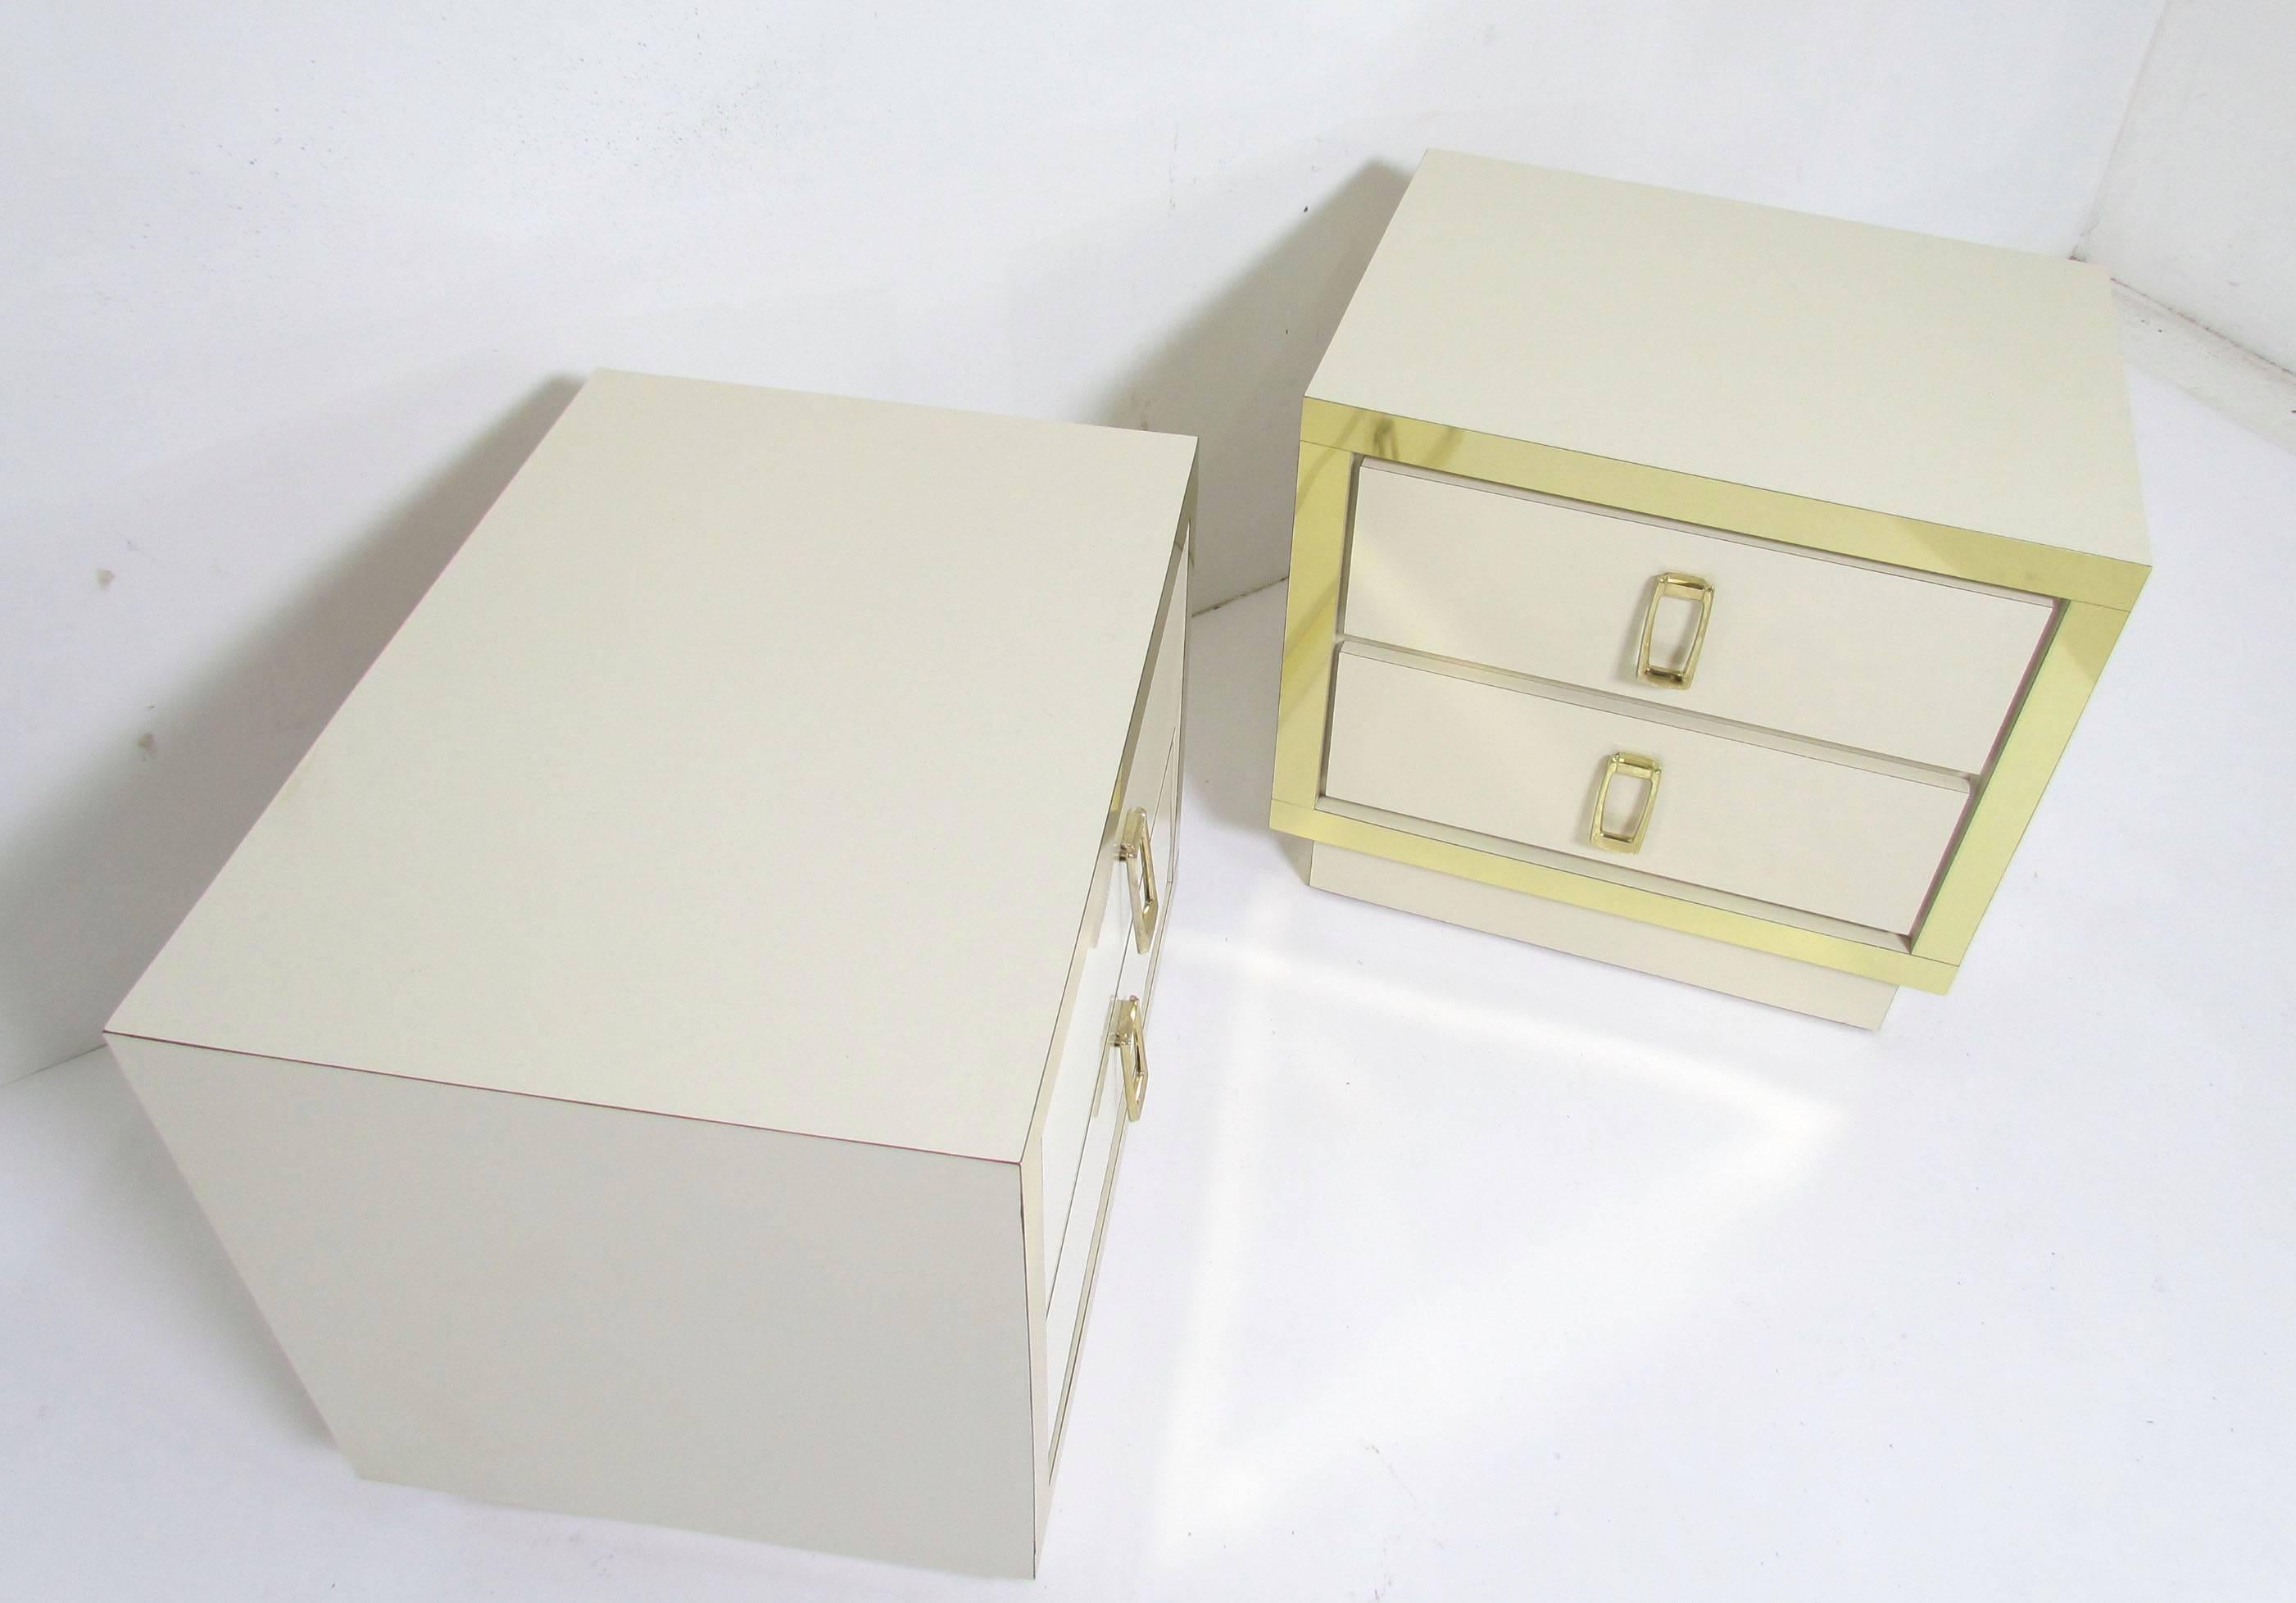 Fabulous pair of Hollywood Regency style nightstands or end tables, circa late 1970s-early 1980s, each with a two drawers. Well constructed of glossy laminate with brass hardware and border strip accents.